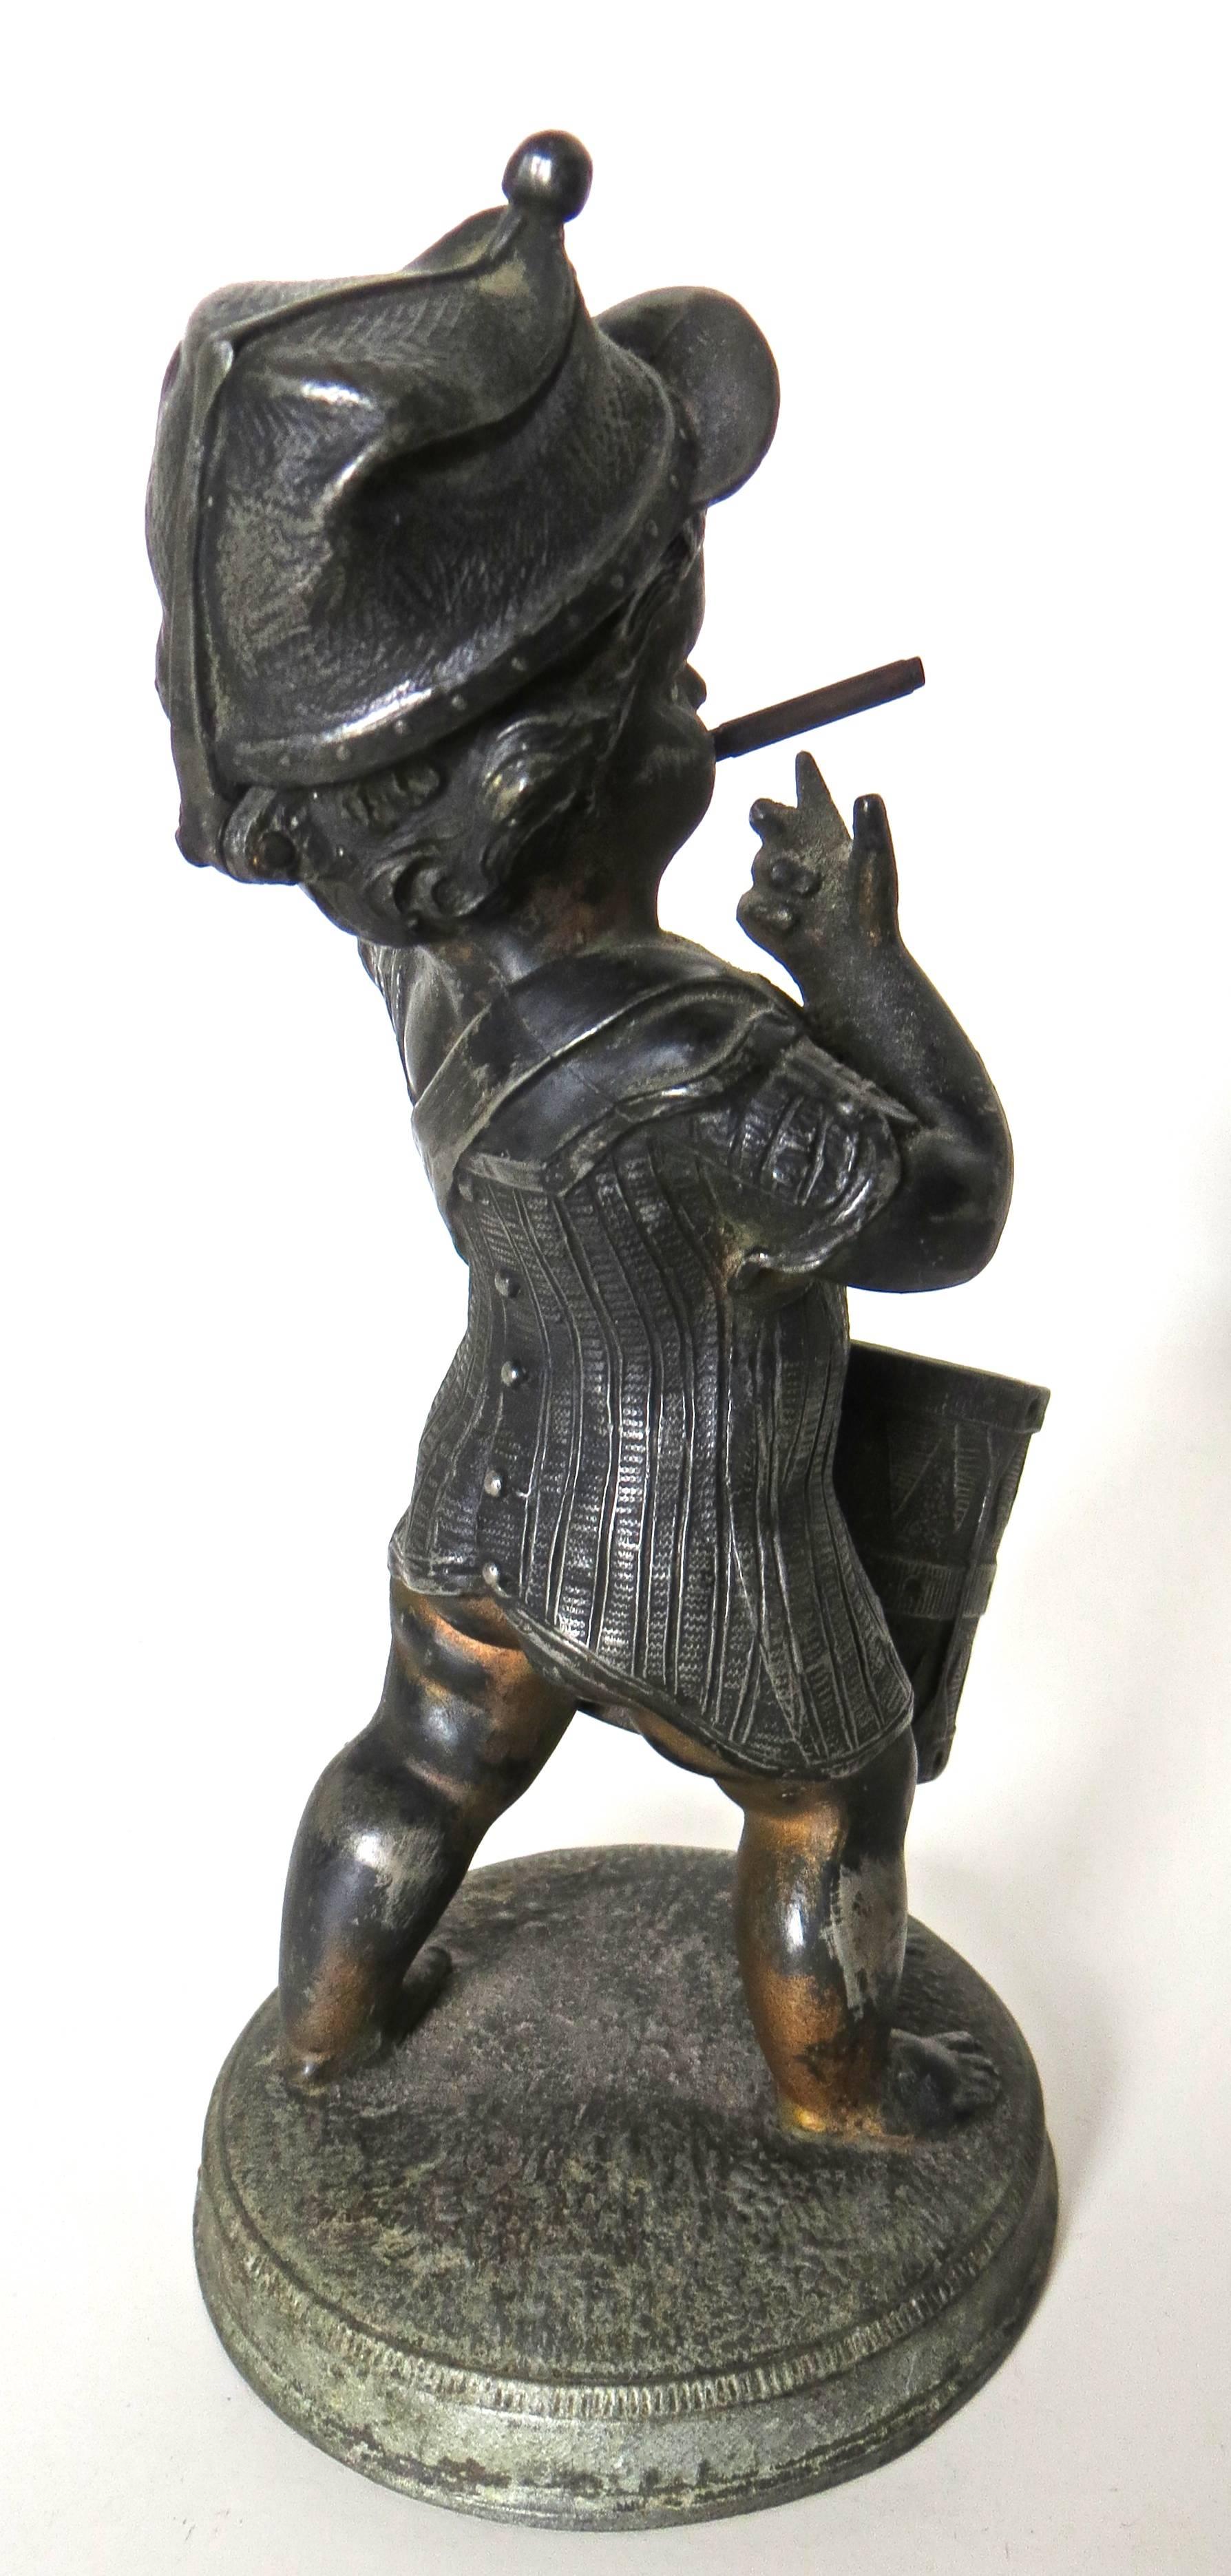 This combination cigar lighter/match holder would have been found in American saloons on top of a bar counter in the late 19th century. It is made out of spelter and is likely of American manufacture, circa 1880s. Kerosene  would have been poured